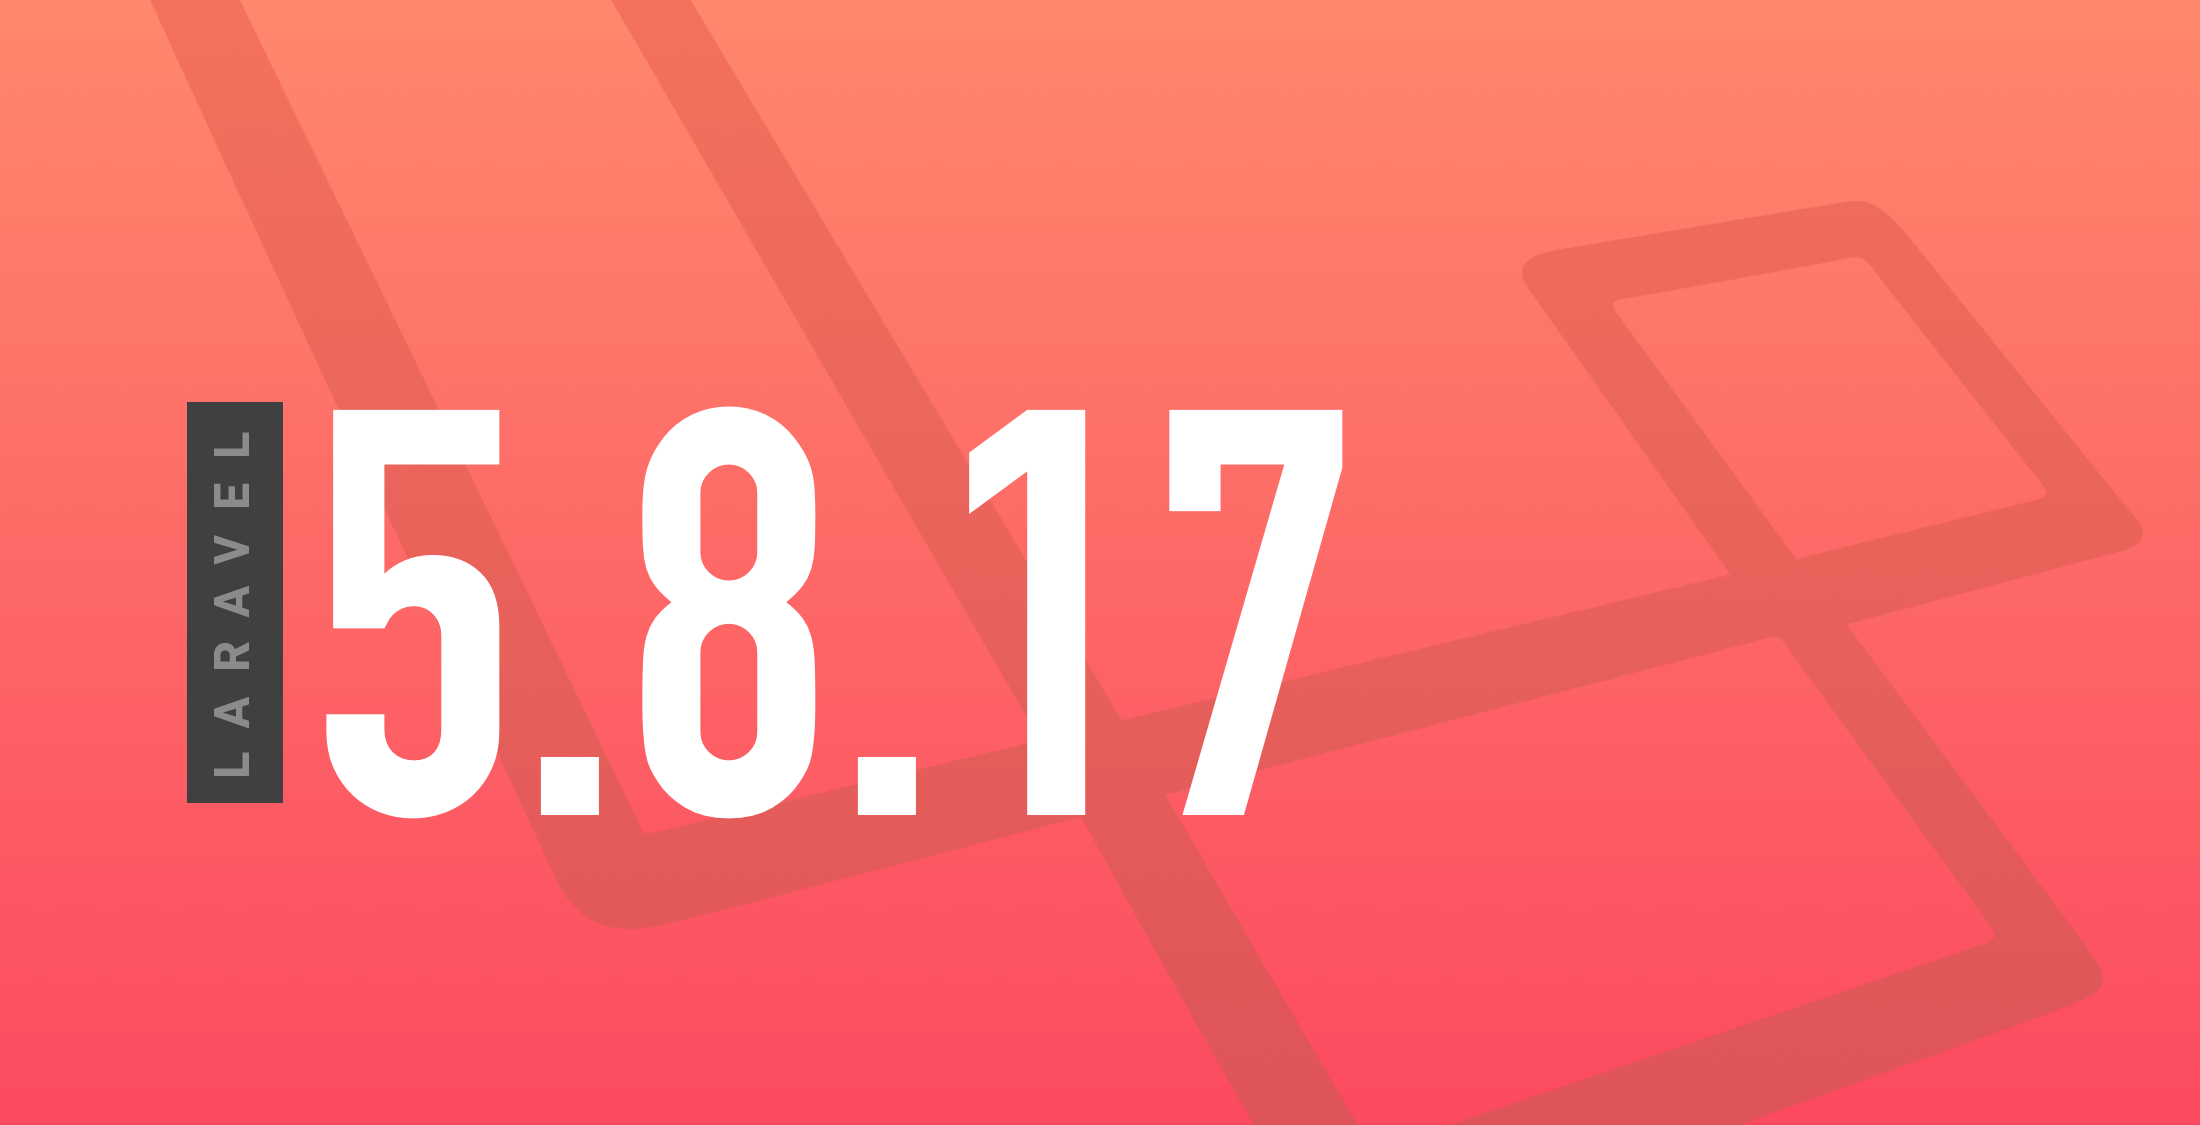 Laravel 5.8.17 Released With a “Tappable” Trait image